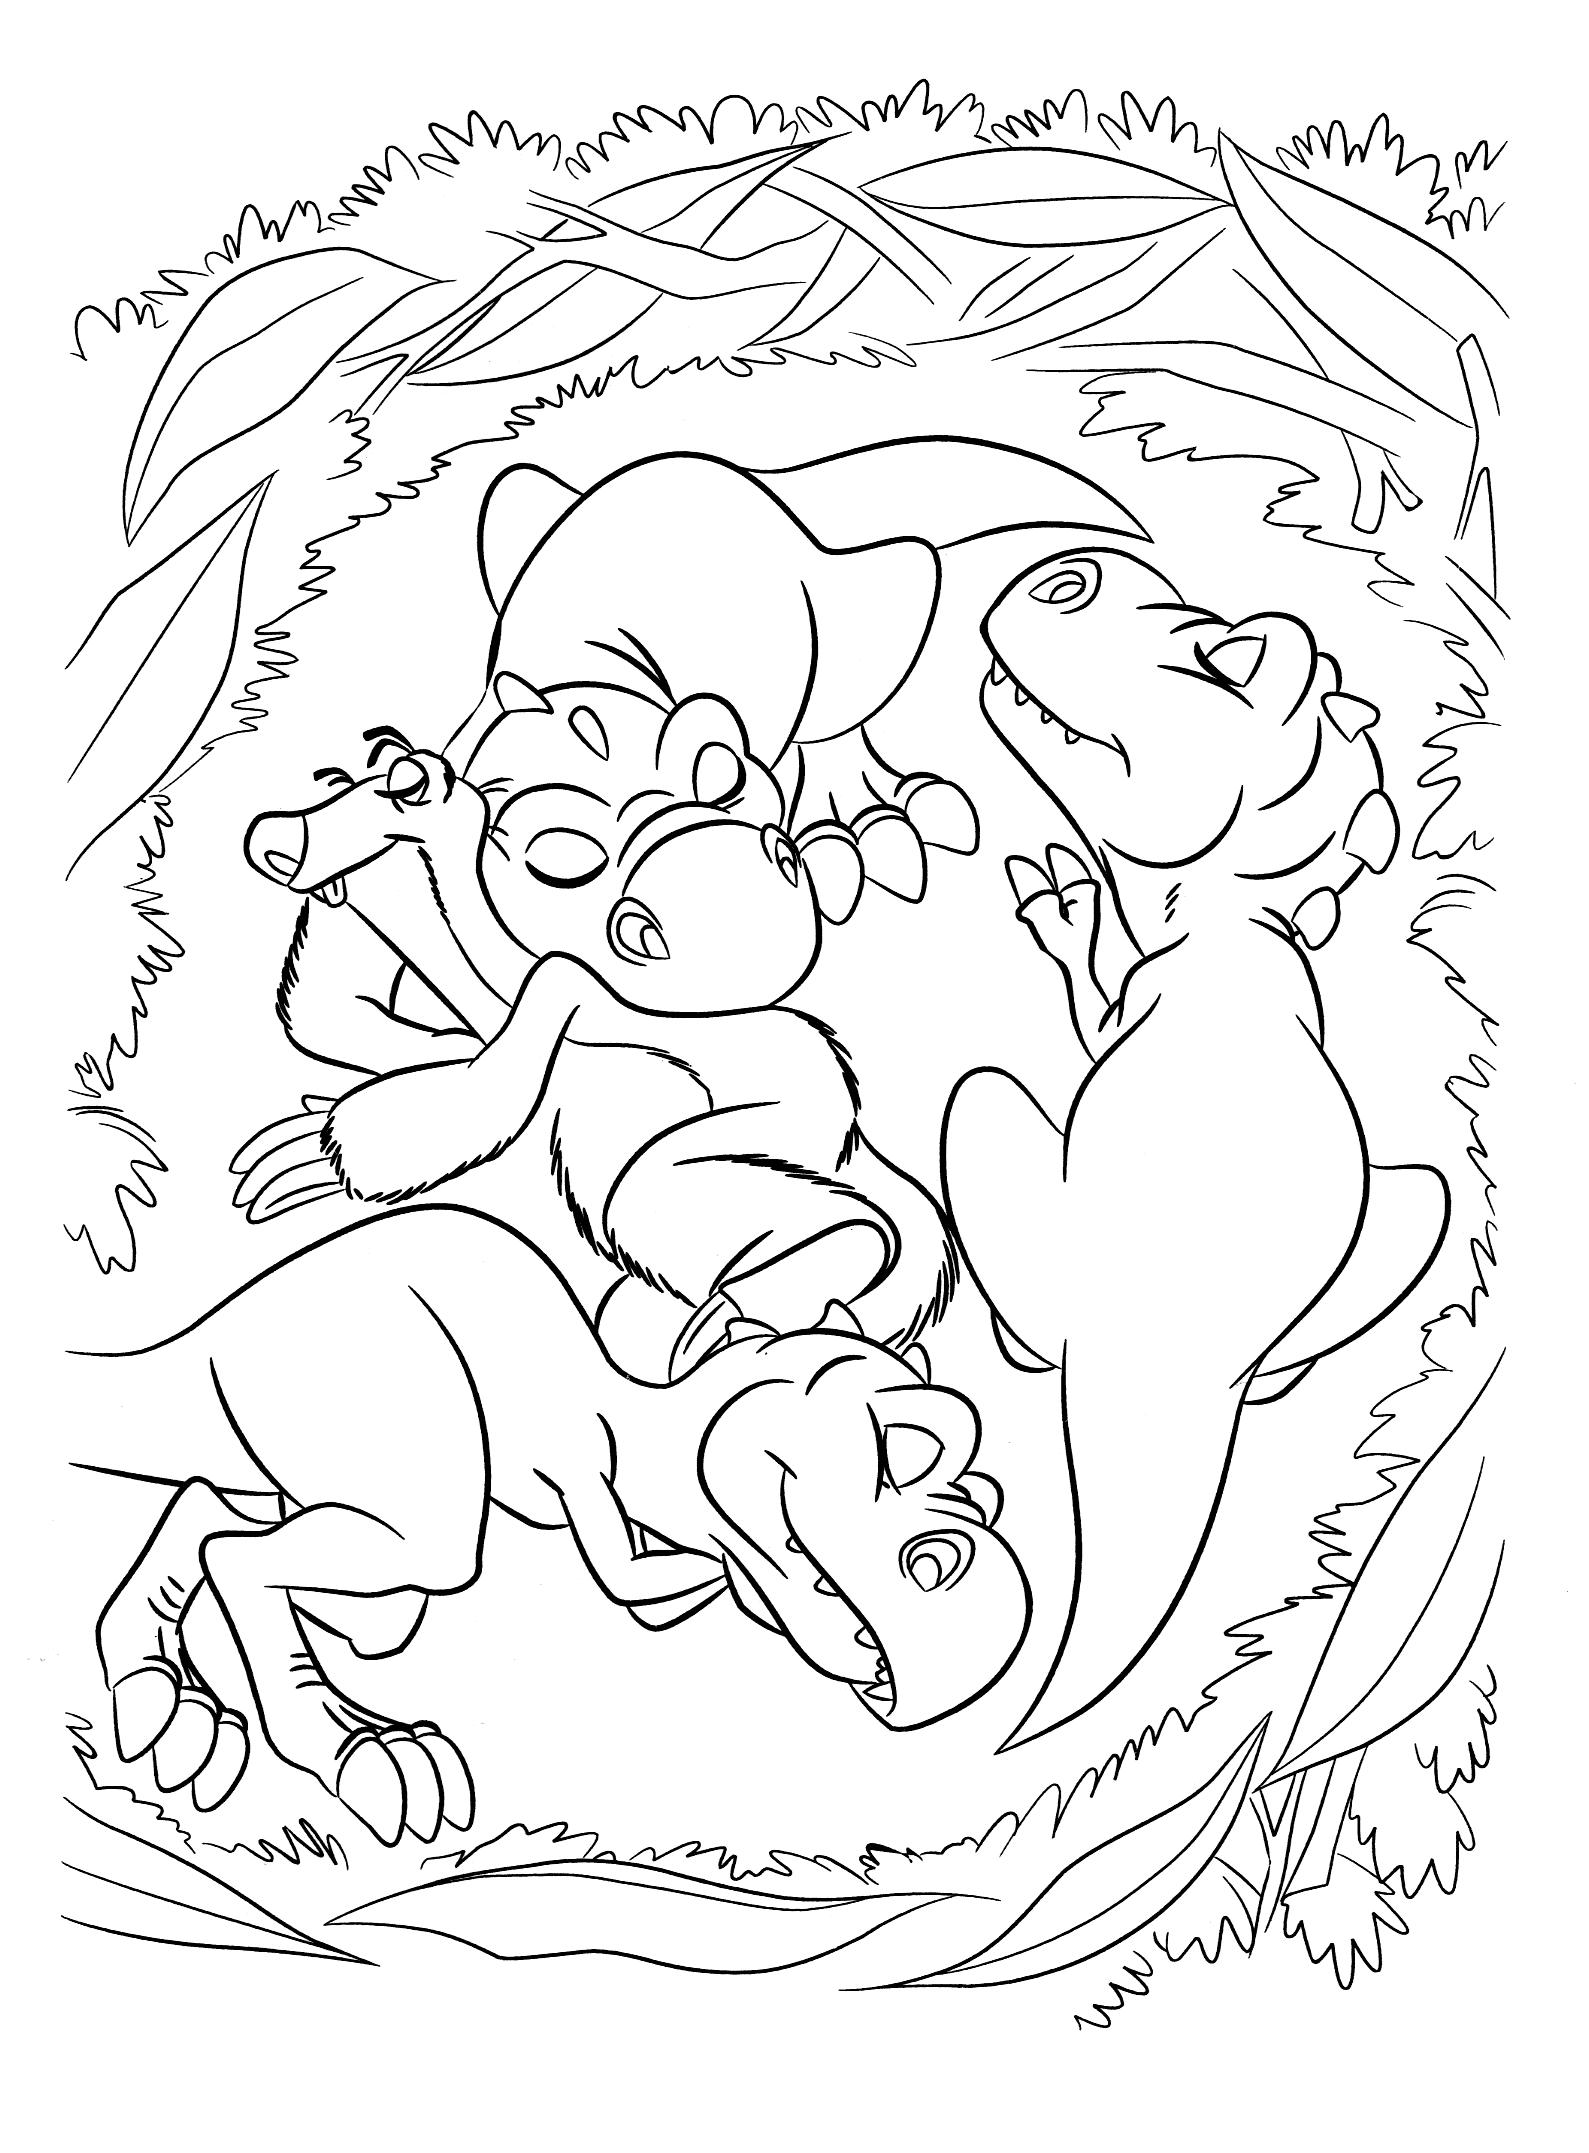 Download Coloring page - Kids are sleeping